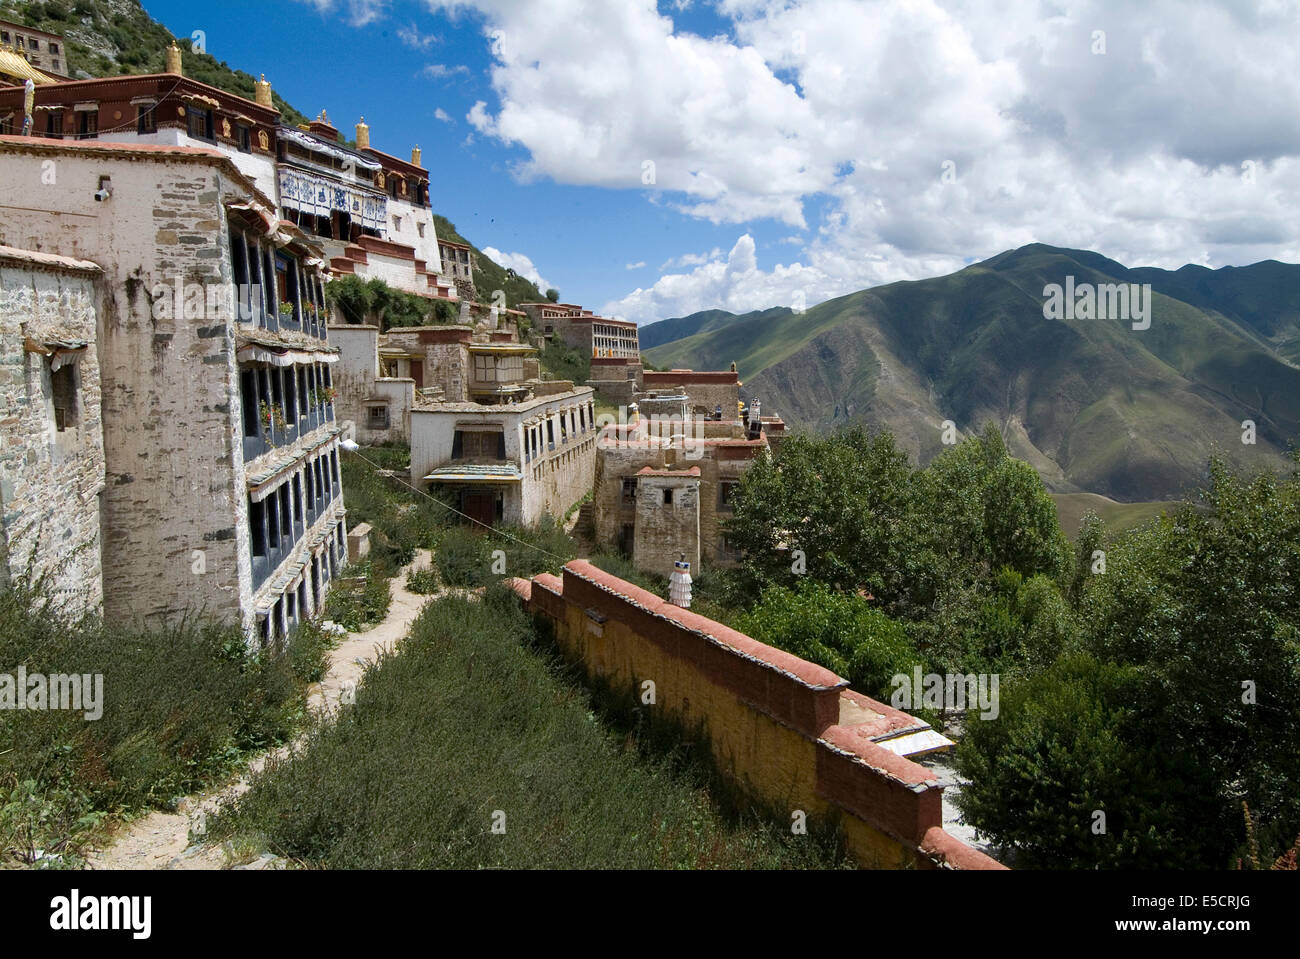 Ganden, the first as well as main Gelugpa monastery, elevation 4500 metres, Tibet, China Stock Photo